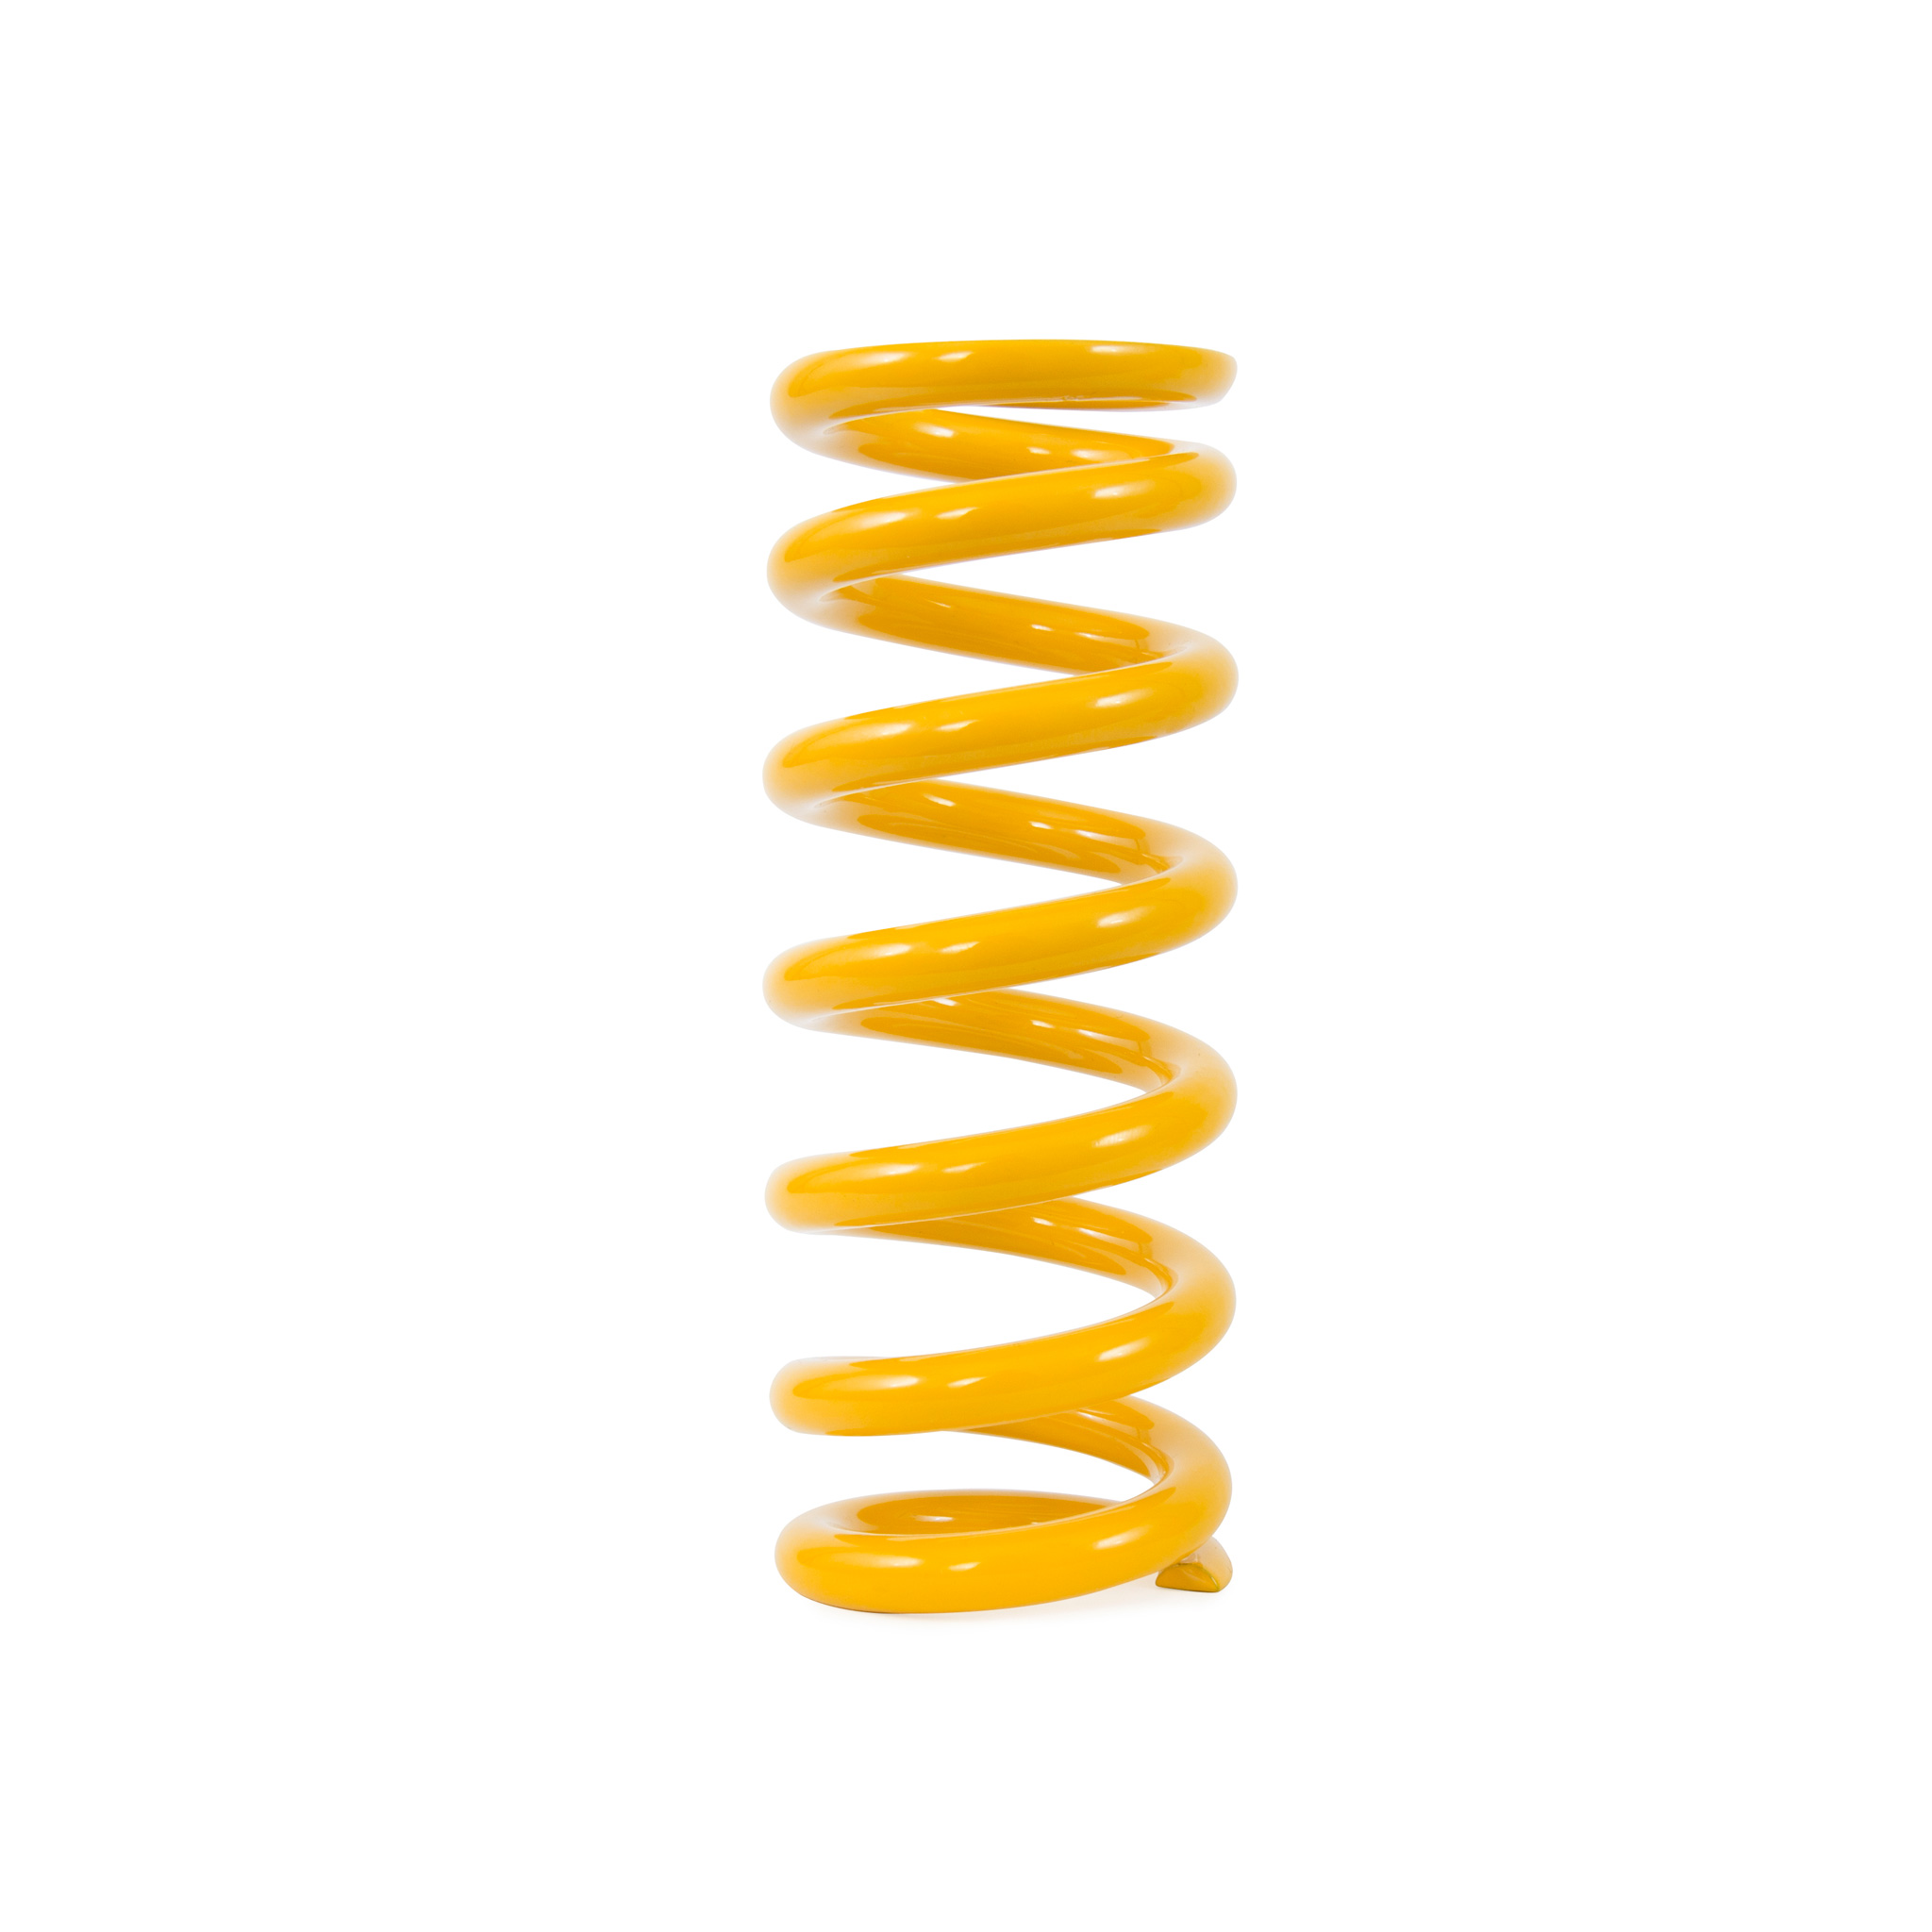 Ohlins Light Weight Spring, 75mm S x 502 lbs/in